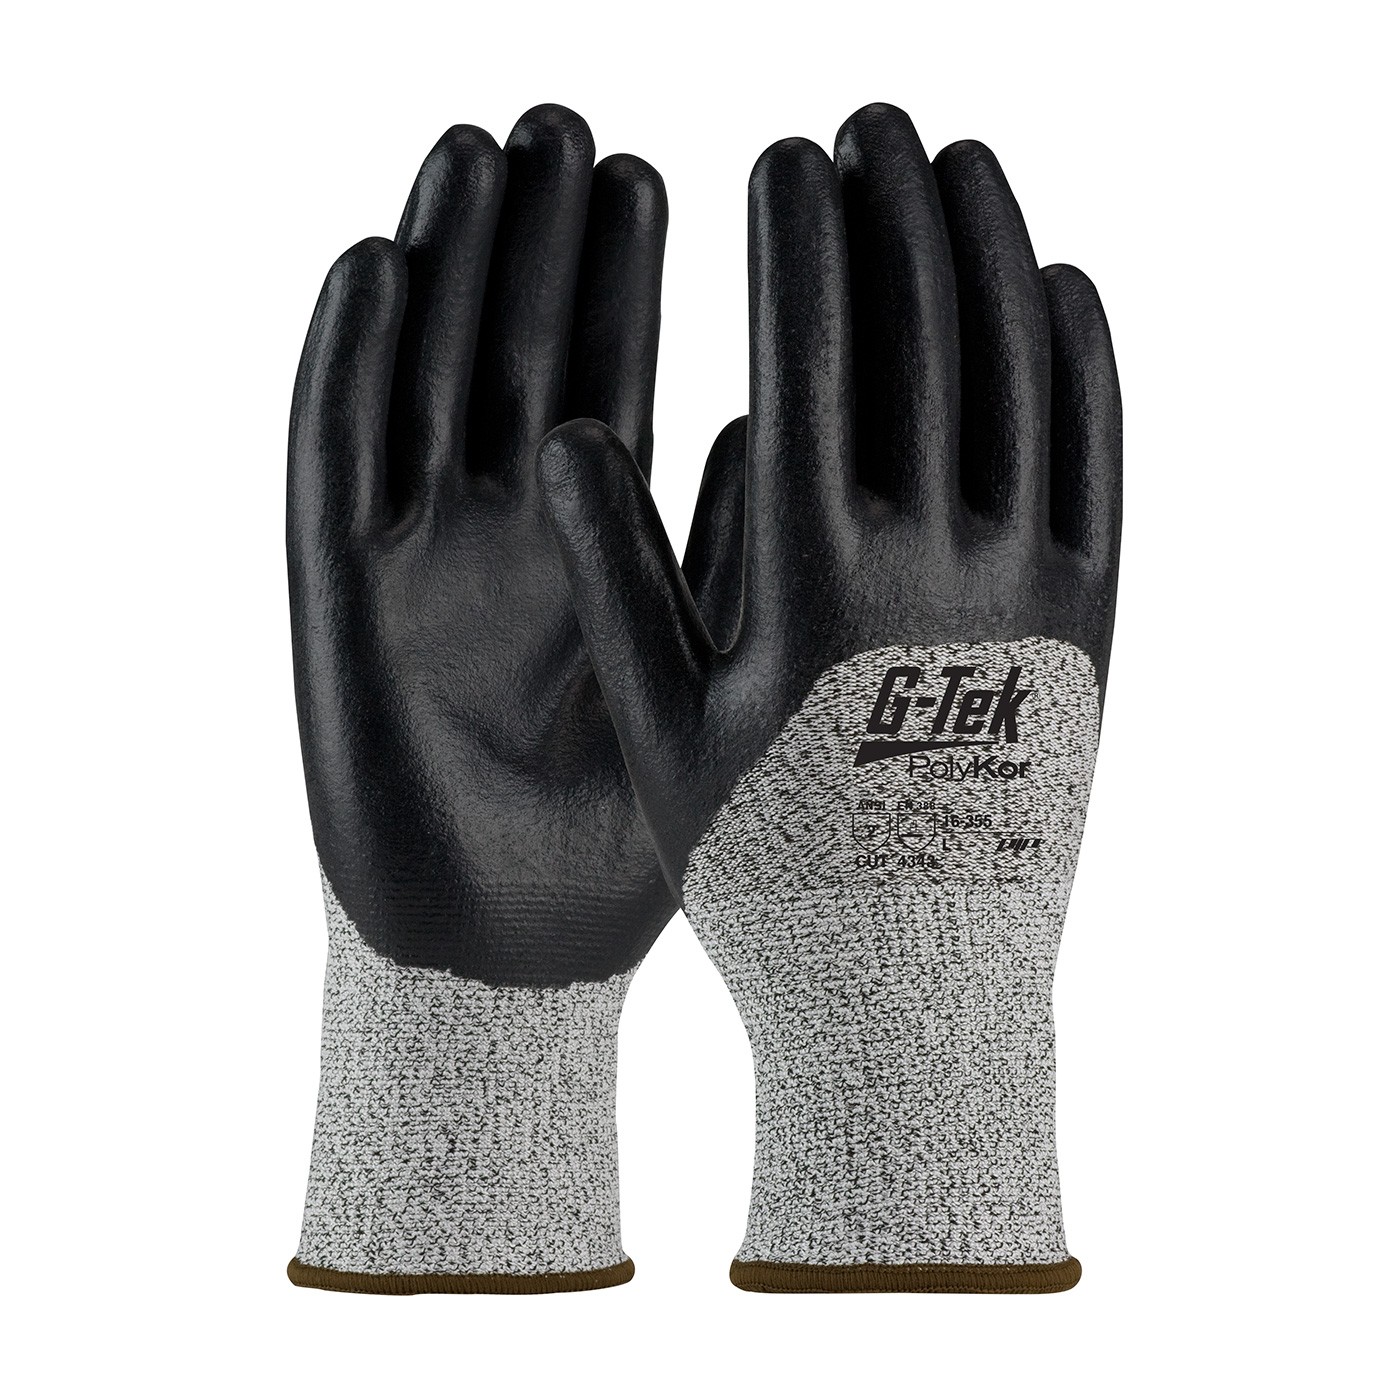 G-Tek® PolyKor® Seamless Knit PolyKor® Blended Glove with Nitrile Coated Foam Grip on Palm, Fingers & Knuckles  (#16-355)